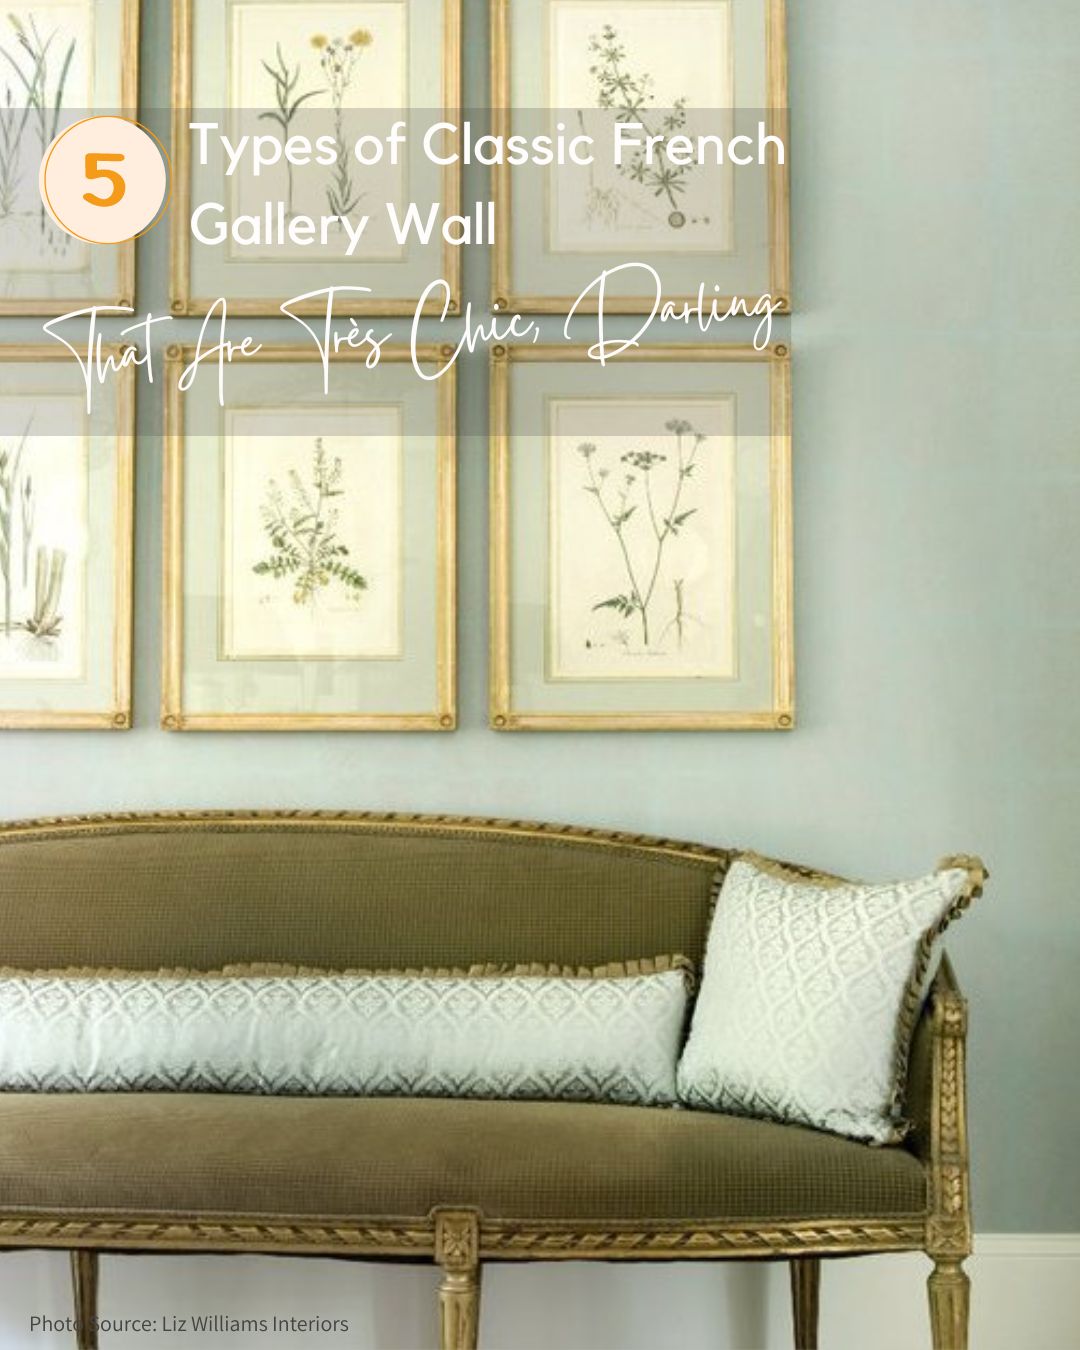 5 Types of Classic French Gallery Wall That Are Très Chic, Darling